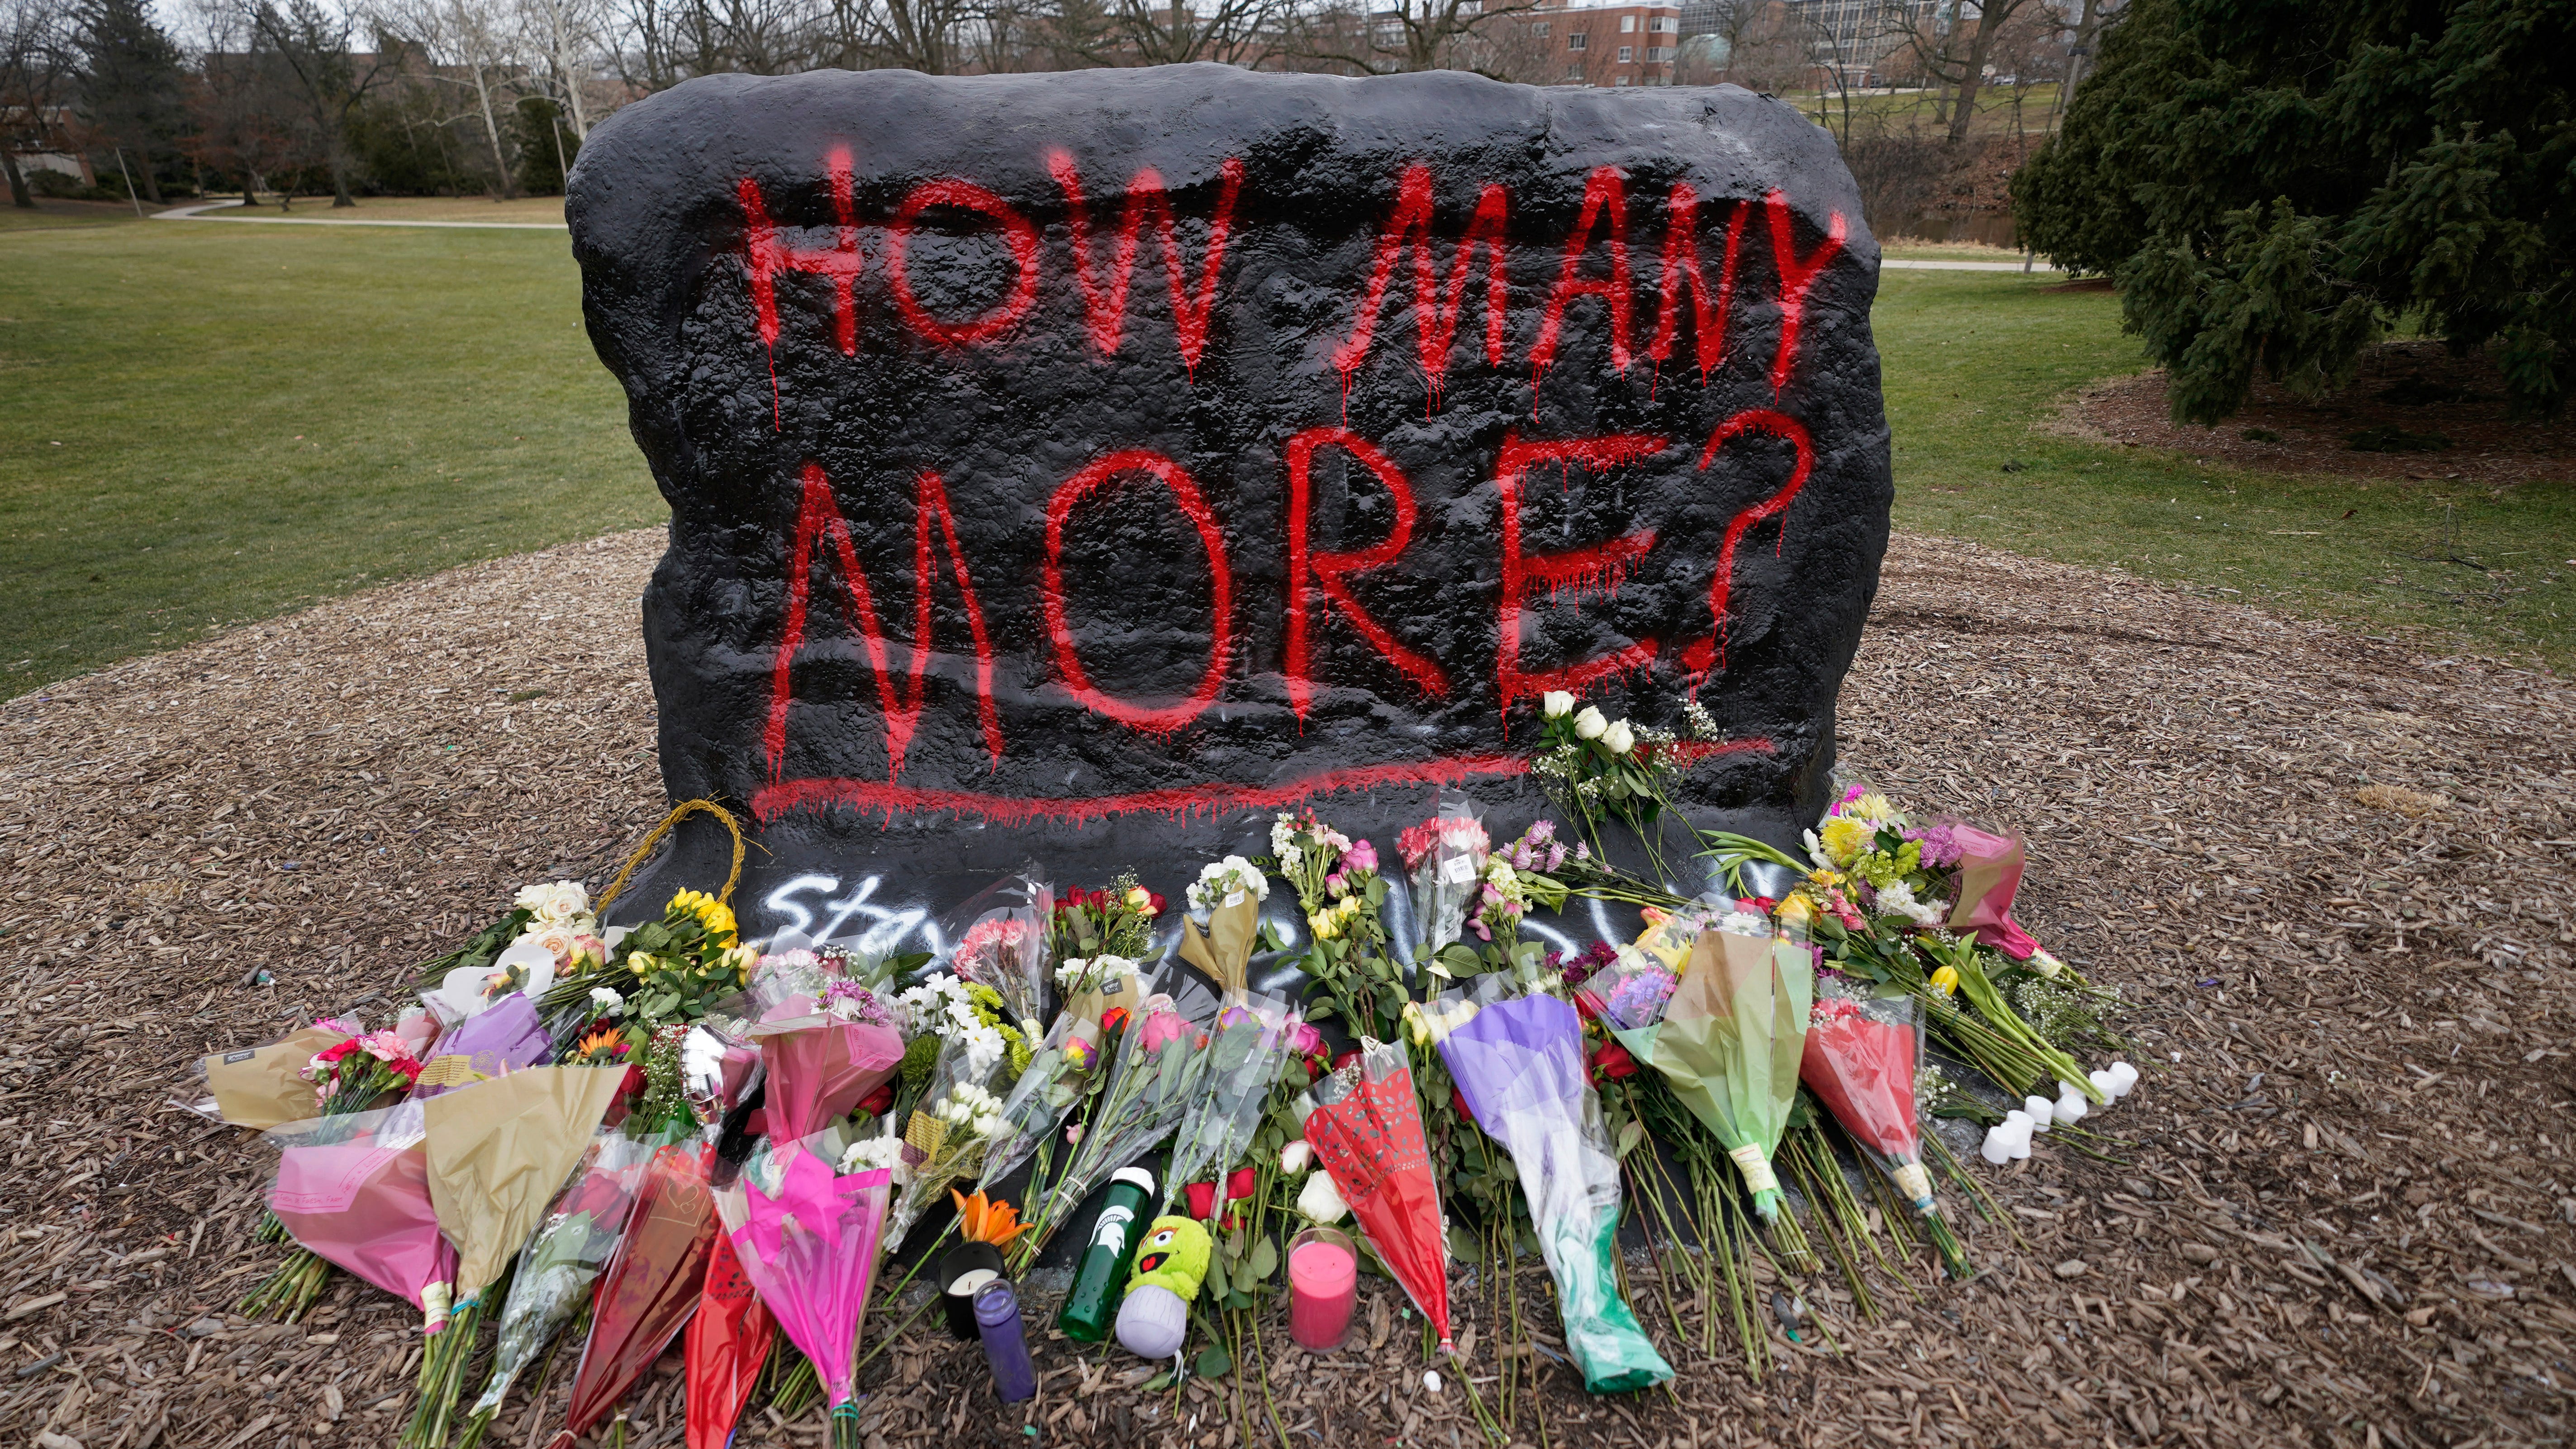 Flowers are displayed at The Rock on the grounds of Michigan State University, in East Lansing, Michigan.